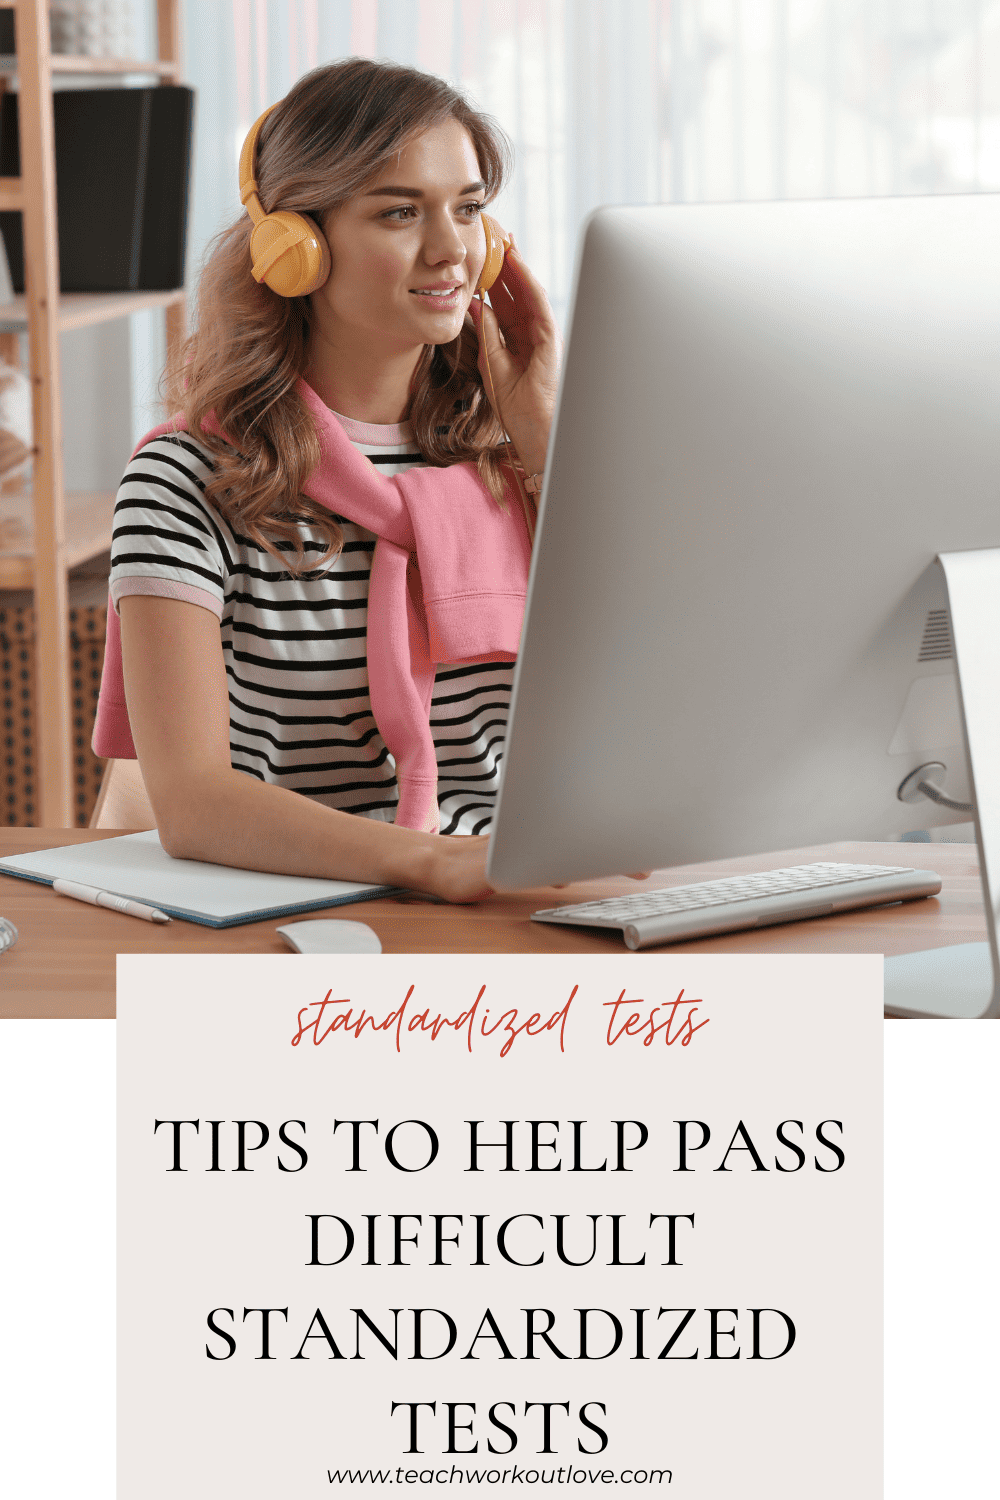 In this article, we take a look at several different types of standardized exams and provide some tips for getting past them.